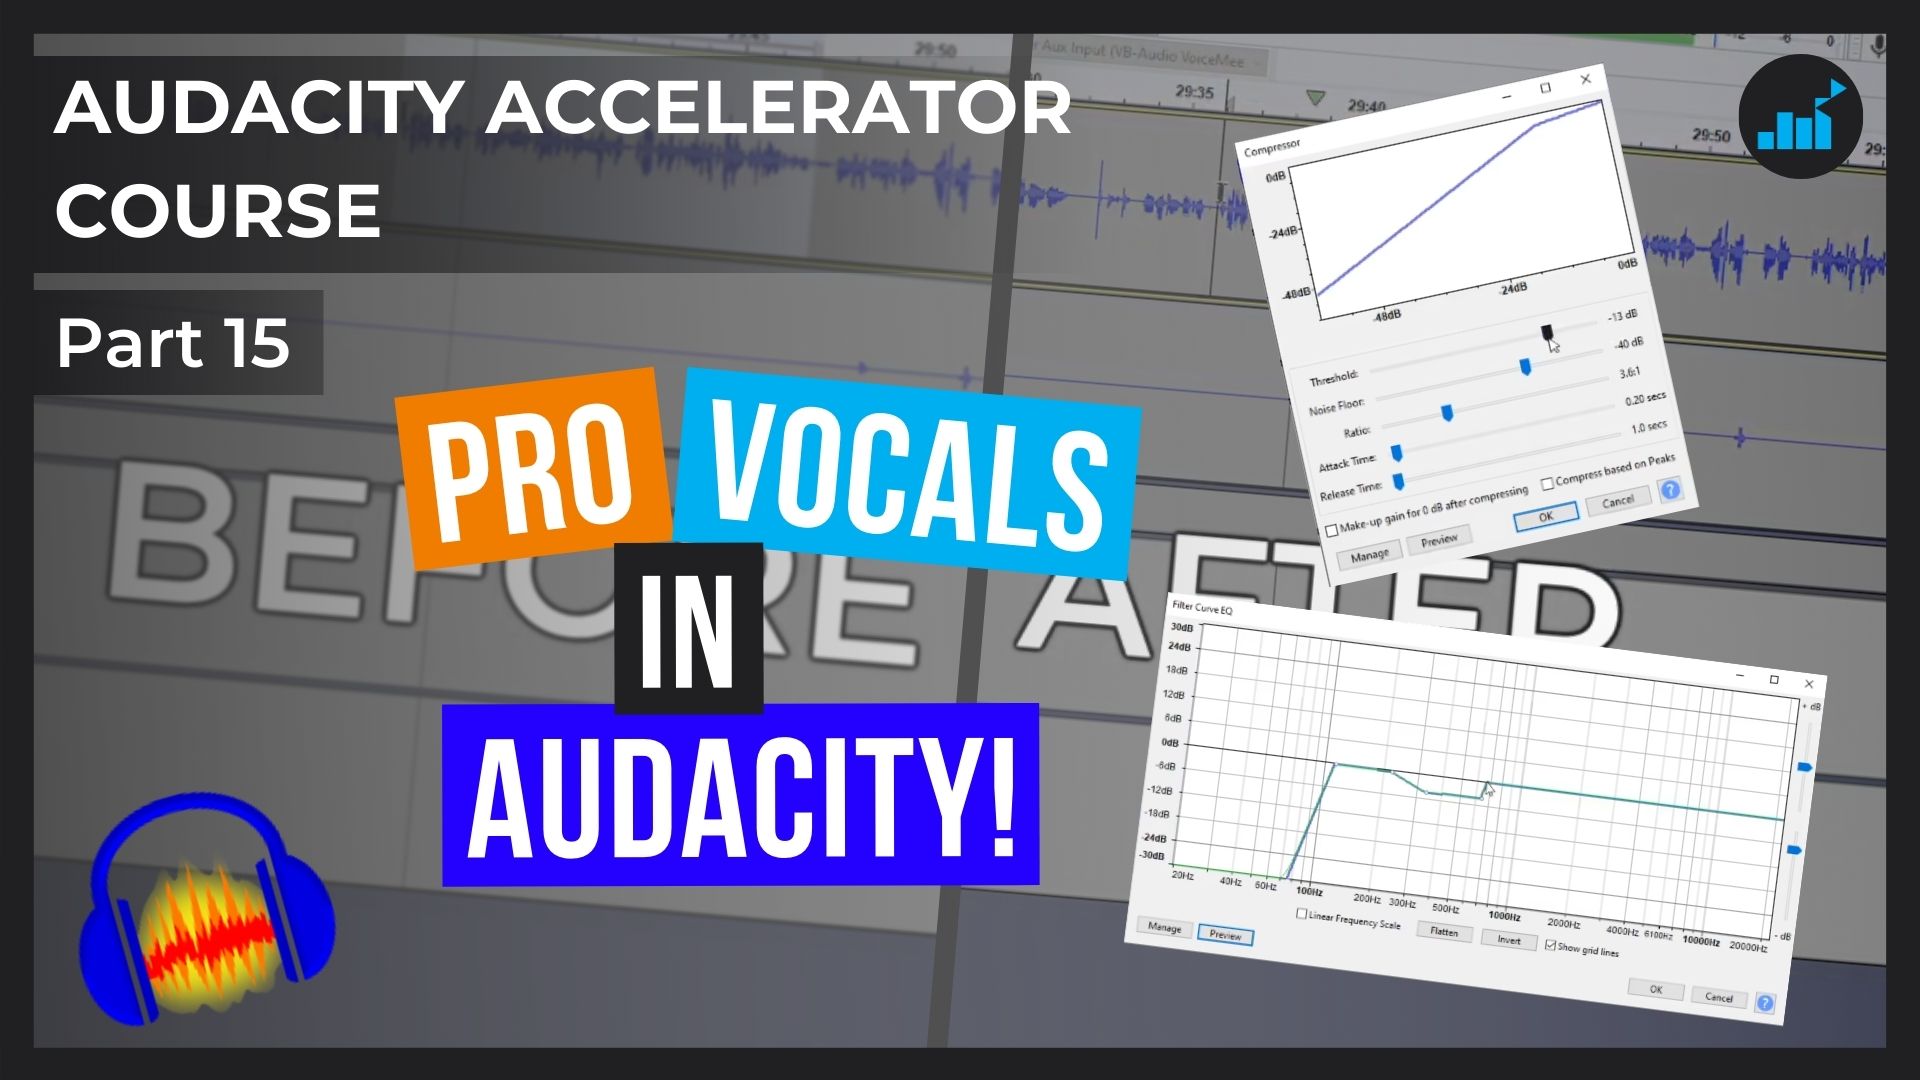 How To Make Your Voice Sound Better in Audacity | Audacity Accelerator  Course [Part 15] - Joe Crow - The Audio Pro